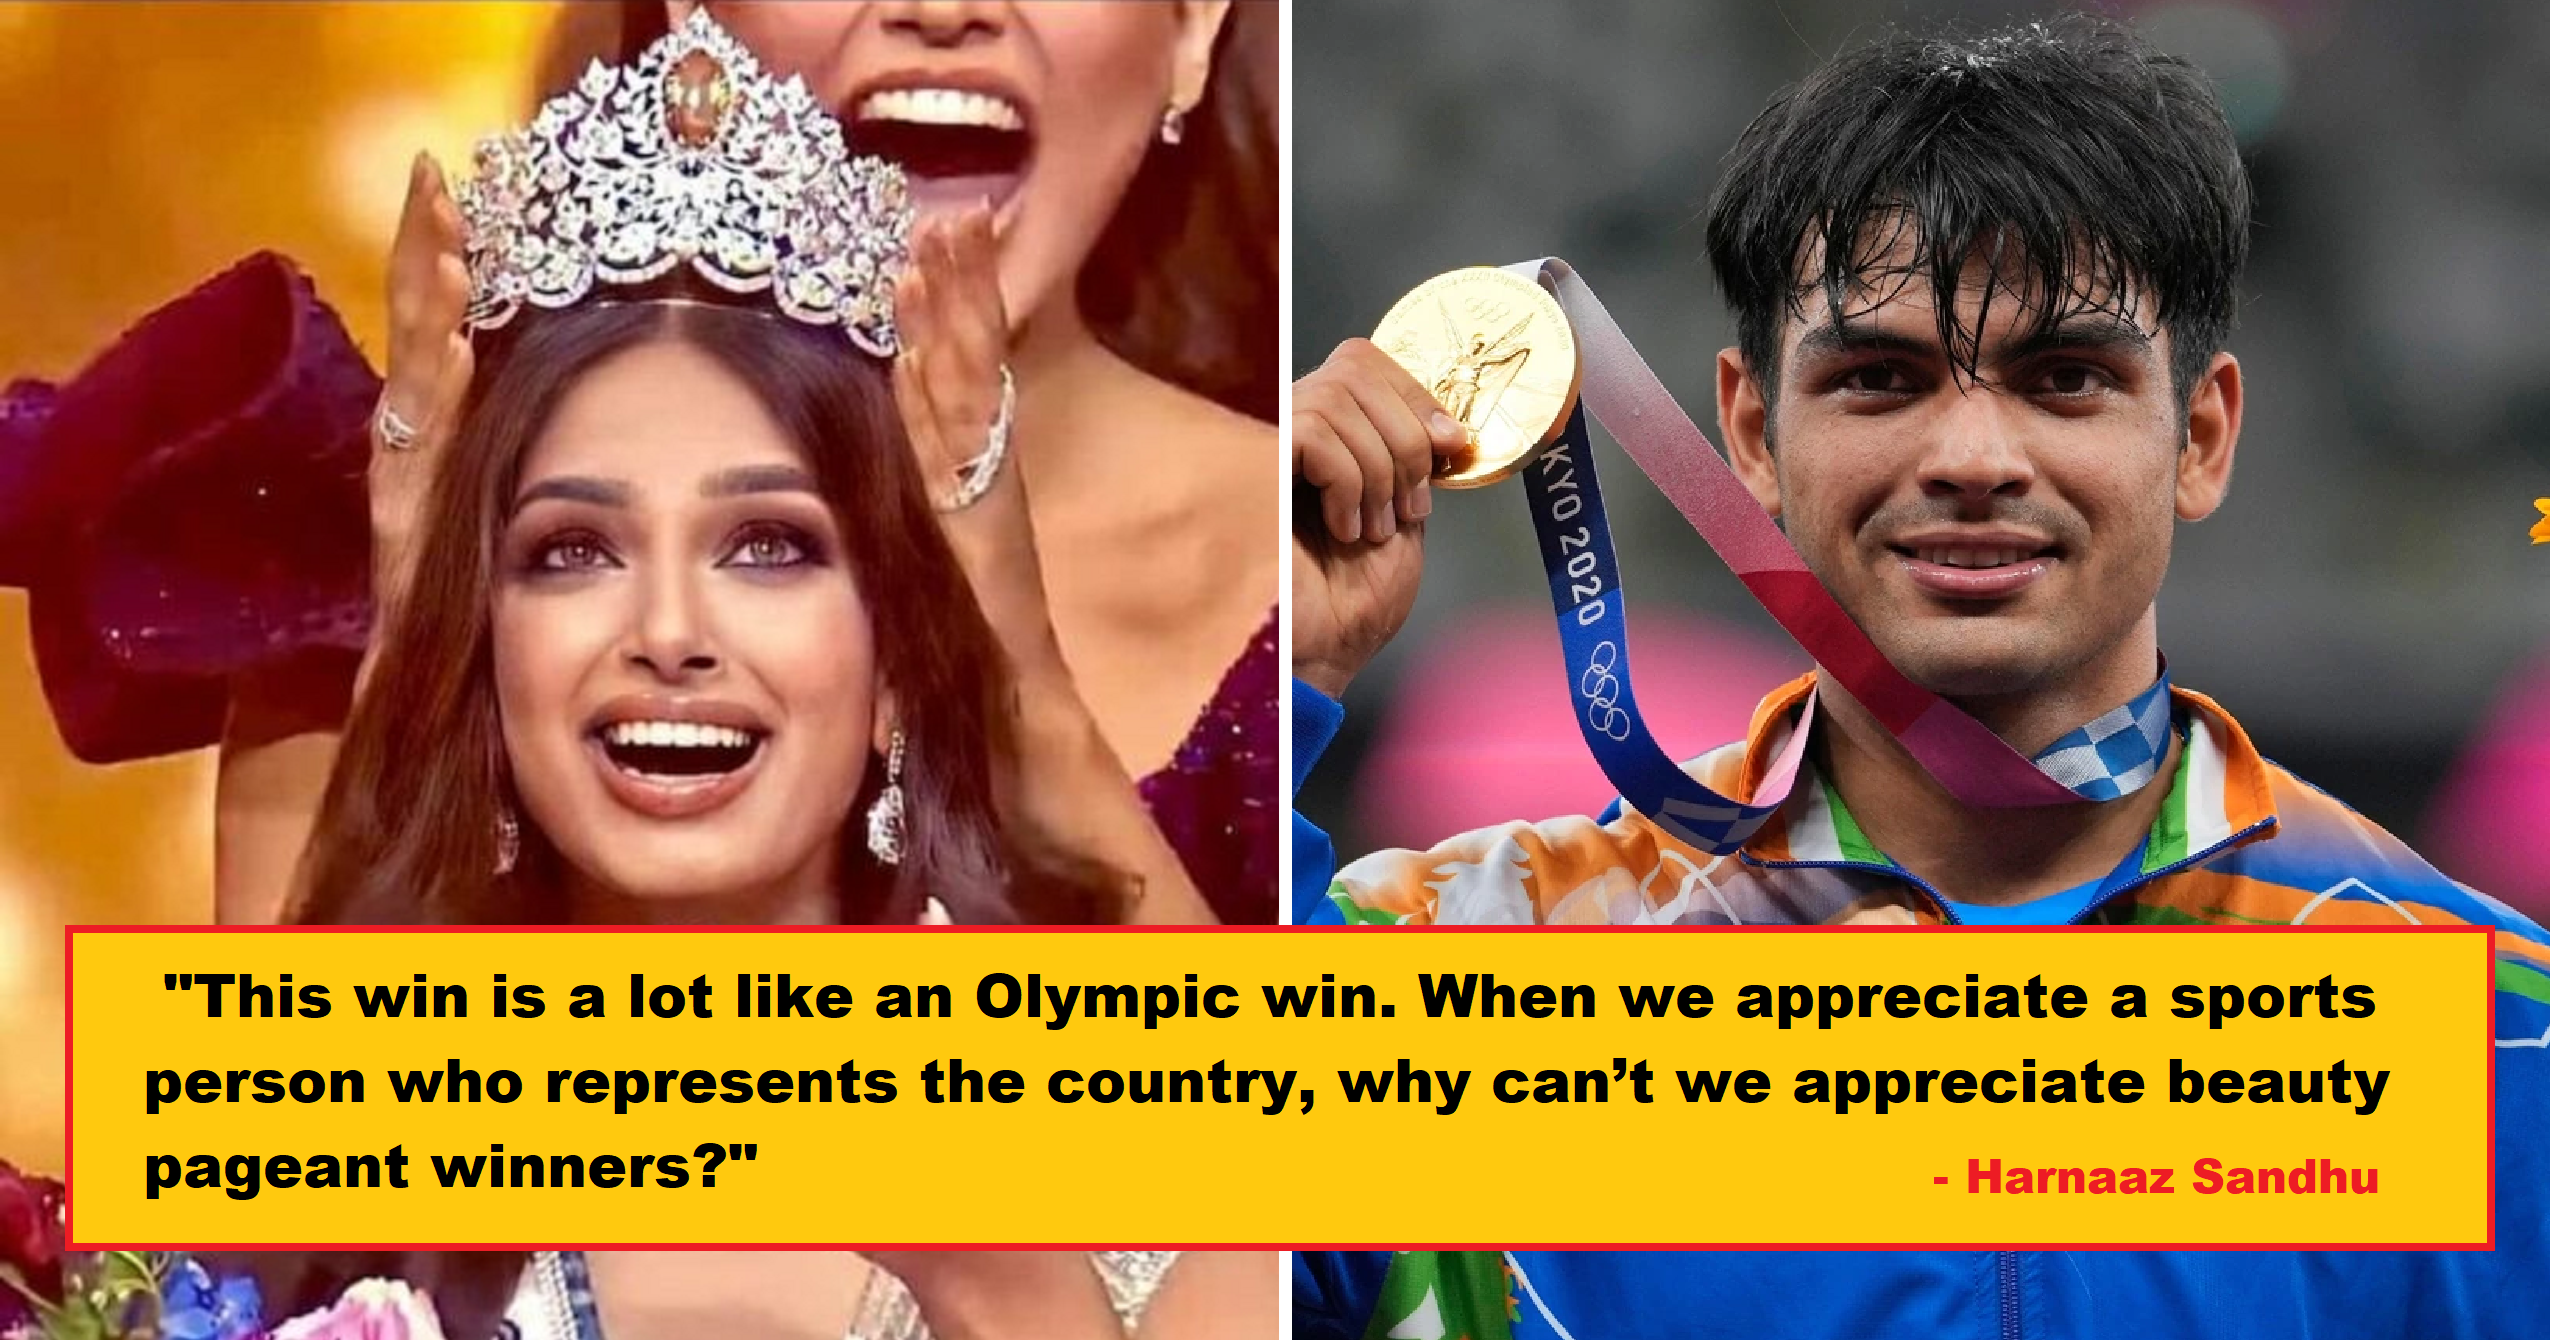 Harnaaz Sandhu Compares Miss Universe To Olympics, While Responding To Trolls Saying She’s Won Only Because She Has A Pretty Face